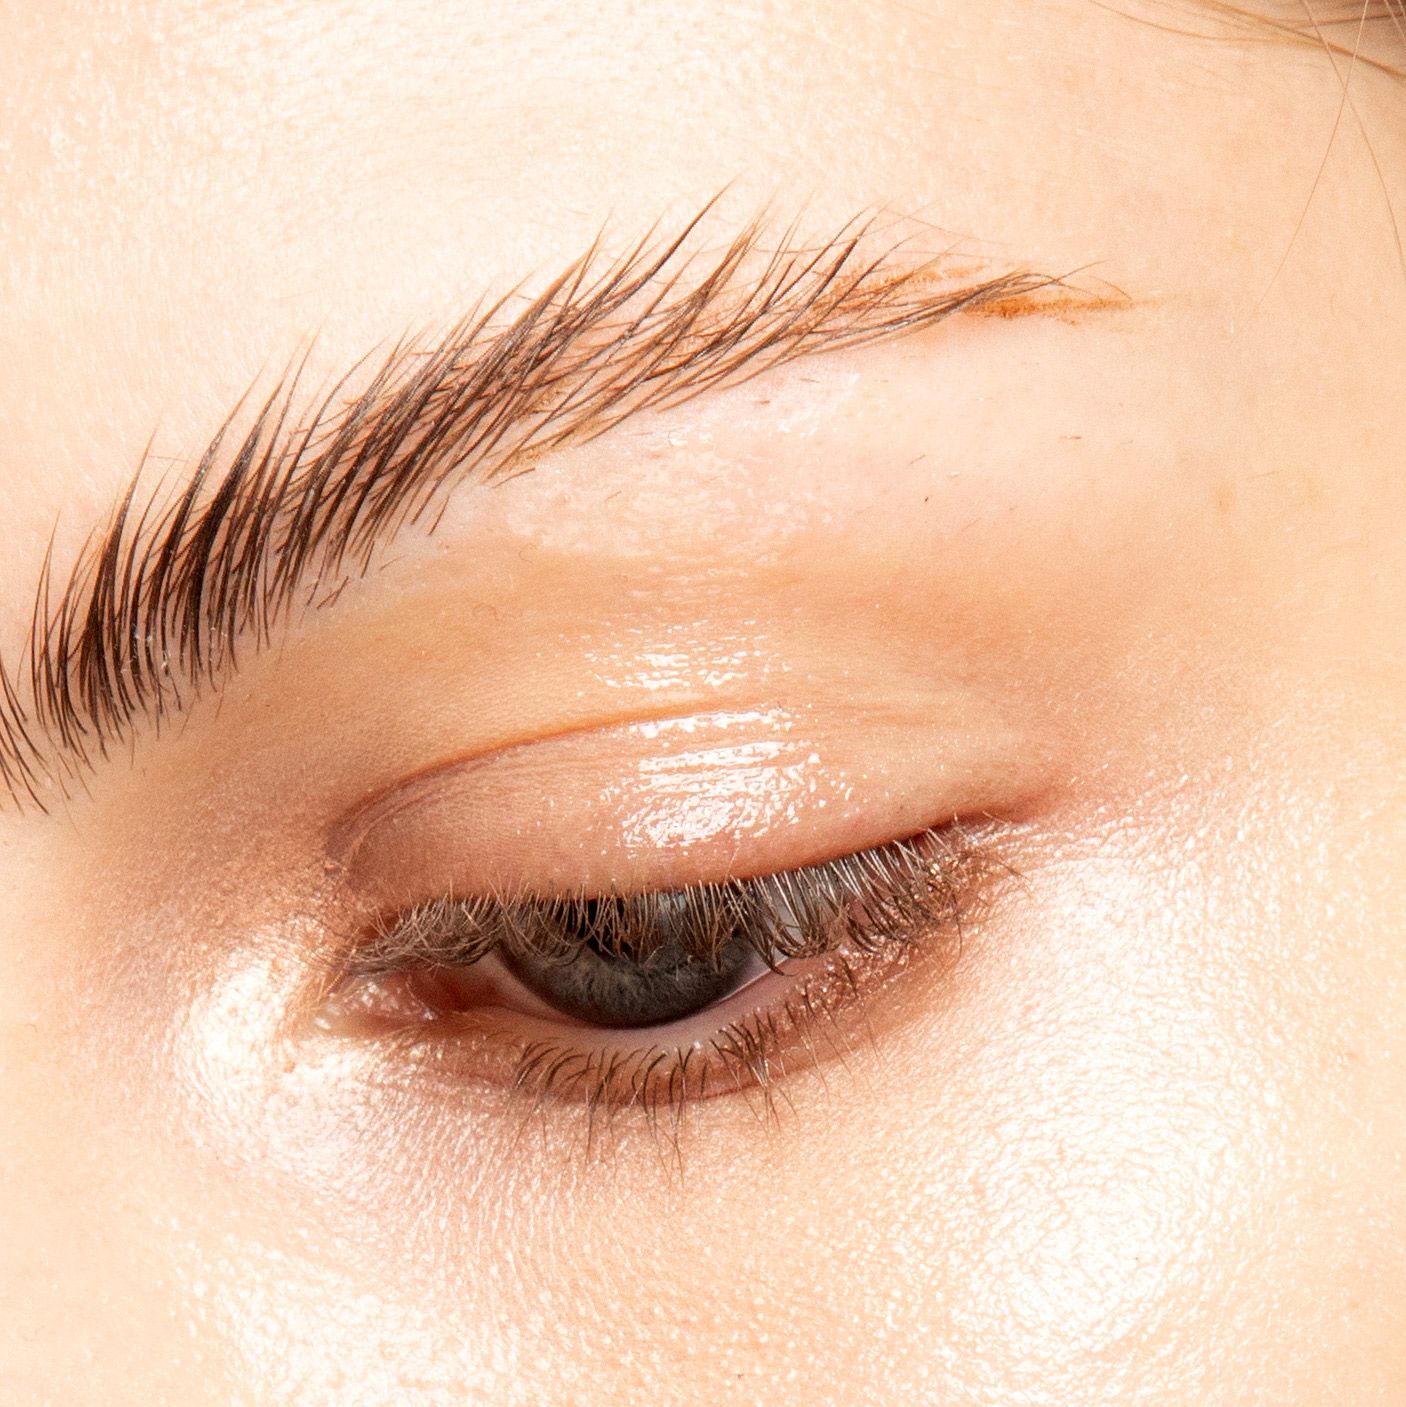 What Are Soap Brows?, The Soap Brow Trend, Explained